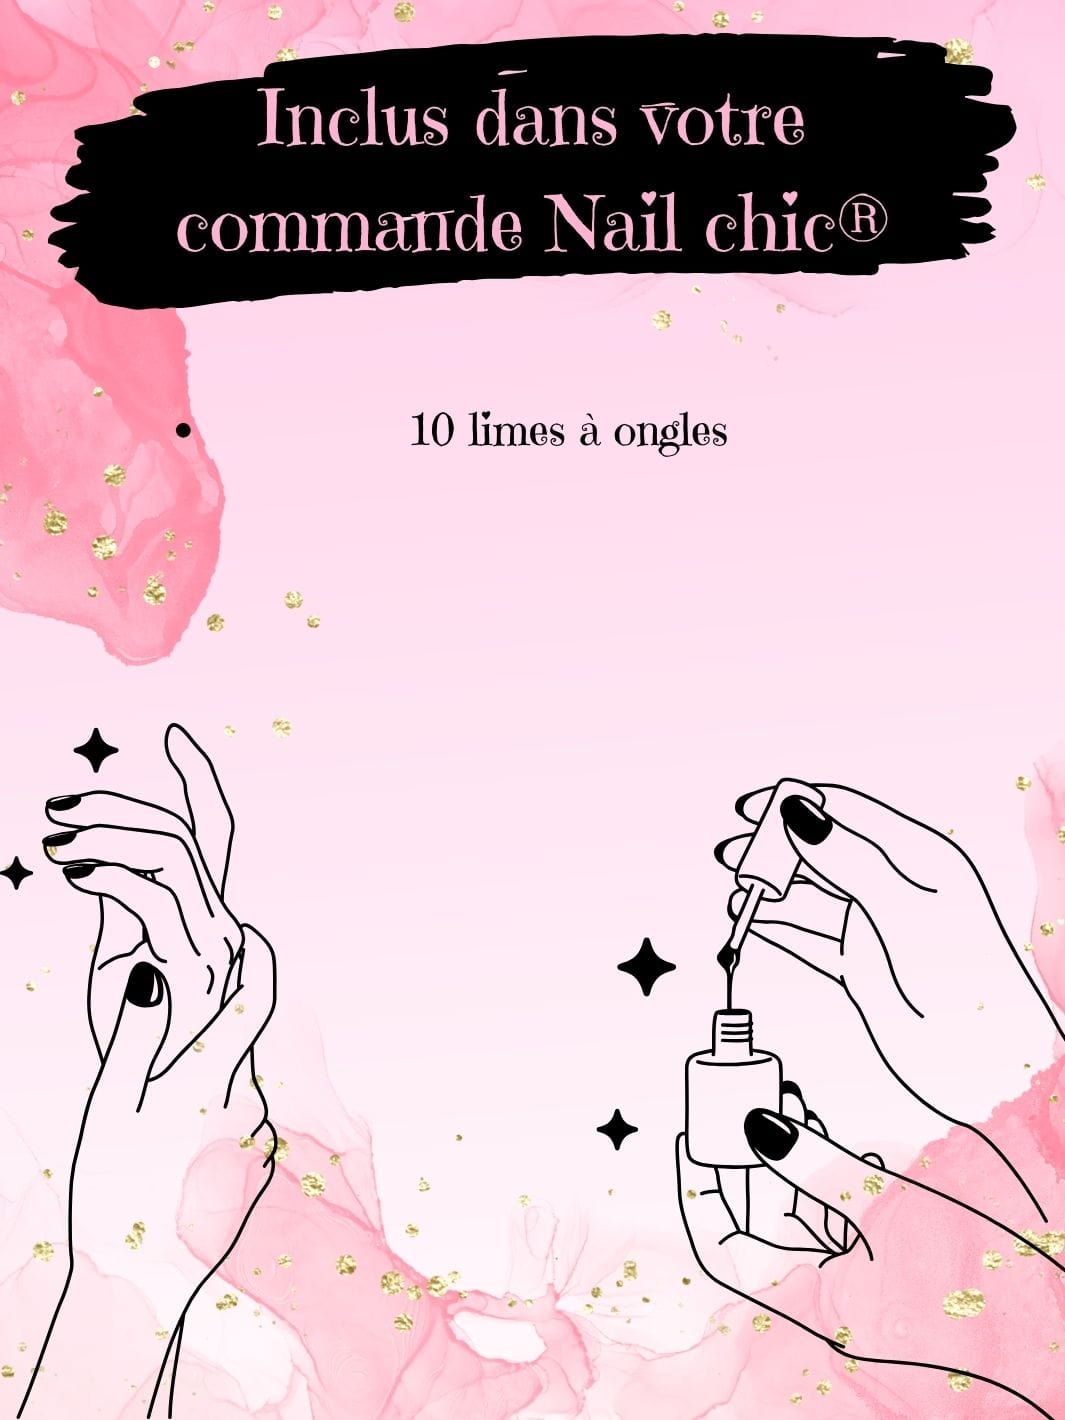 Meilleur lime a ongle Nail Chic